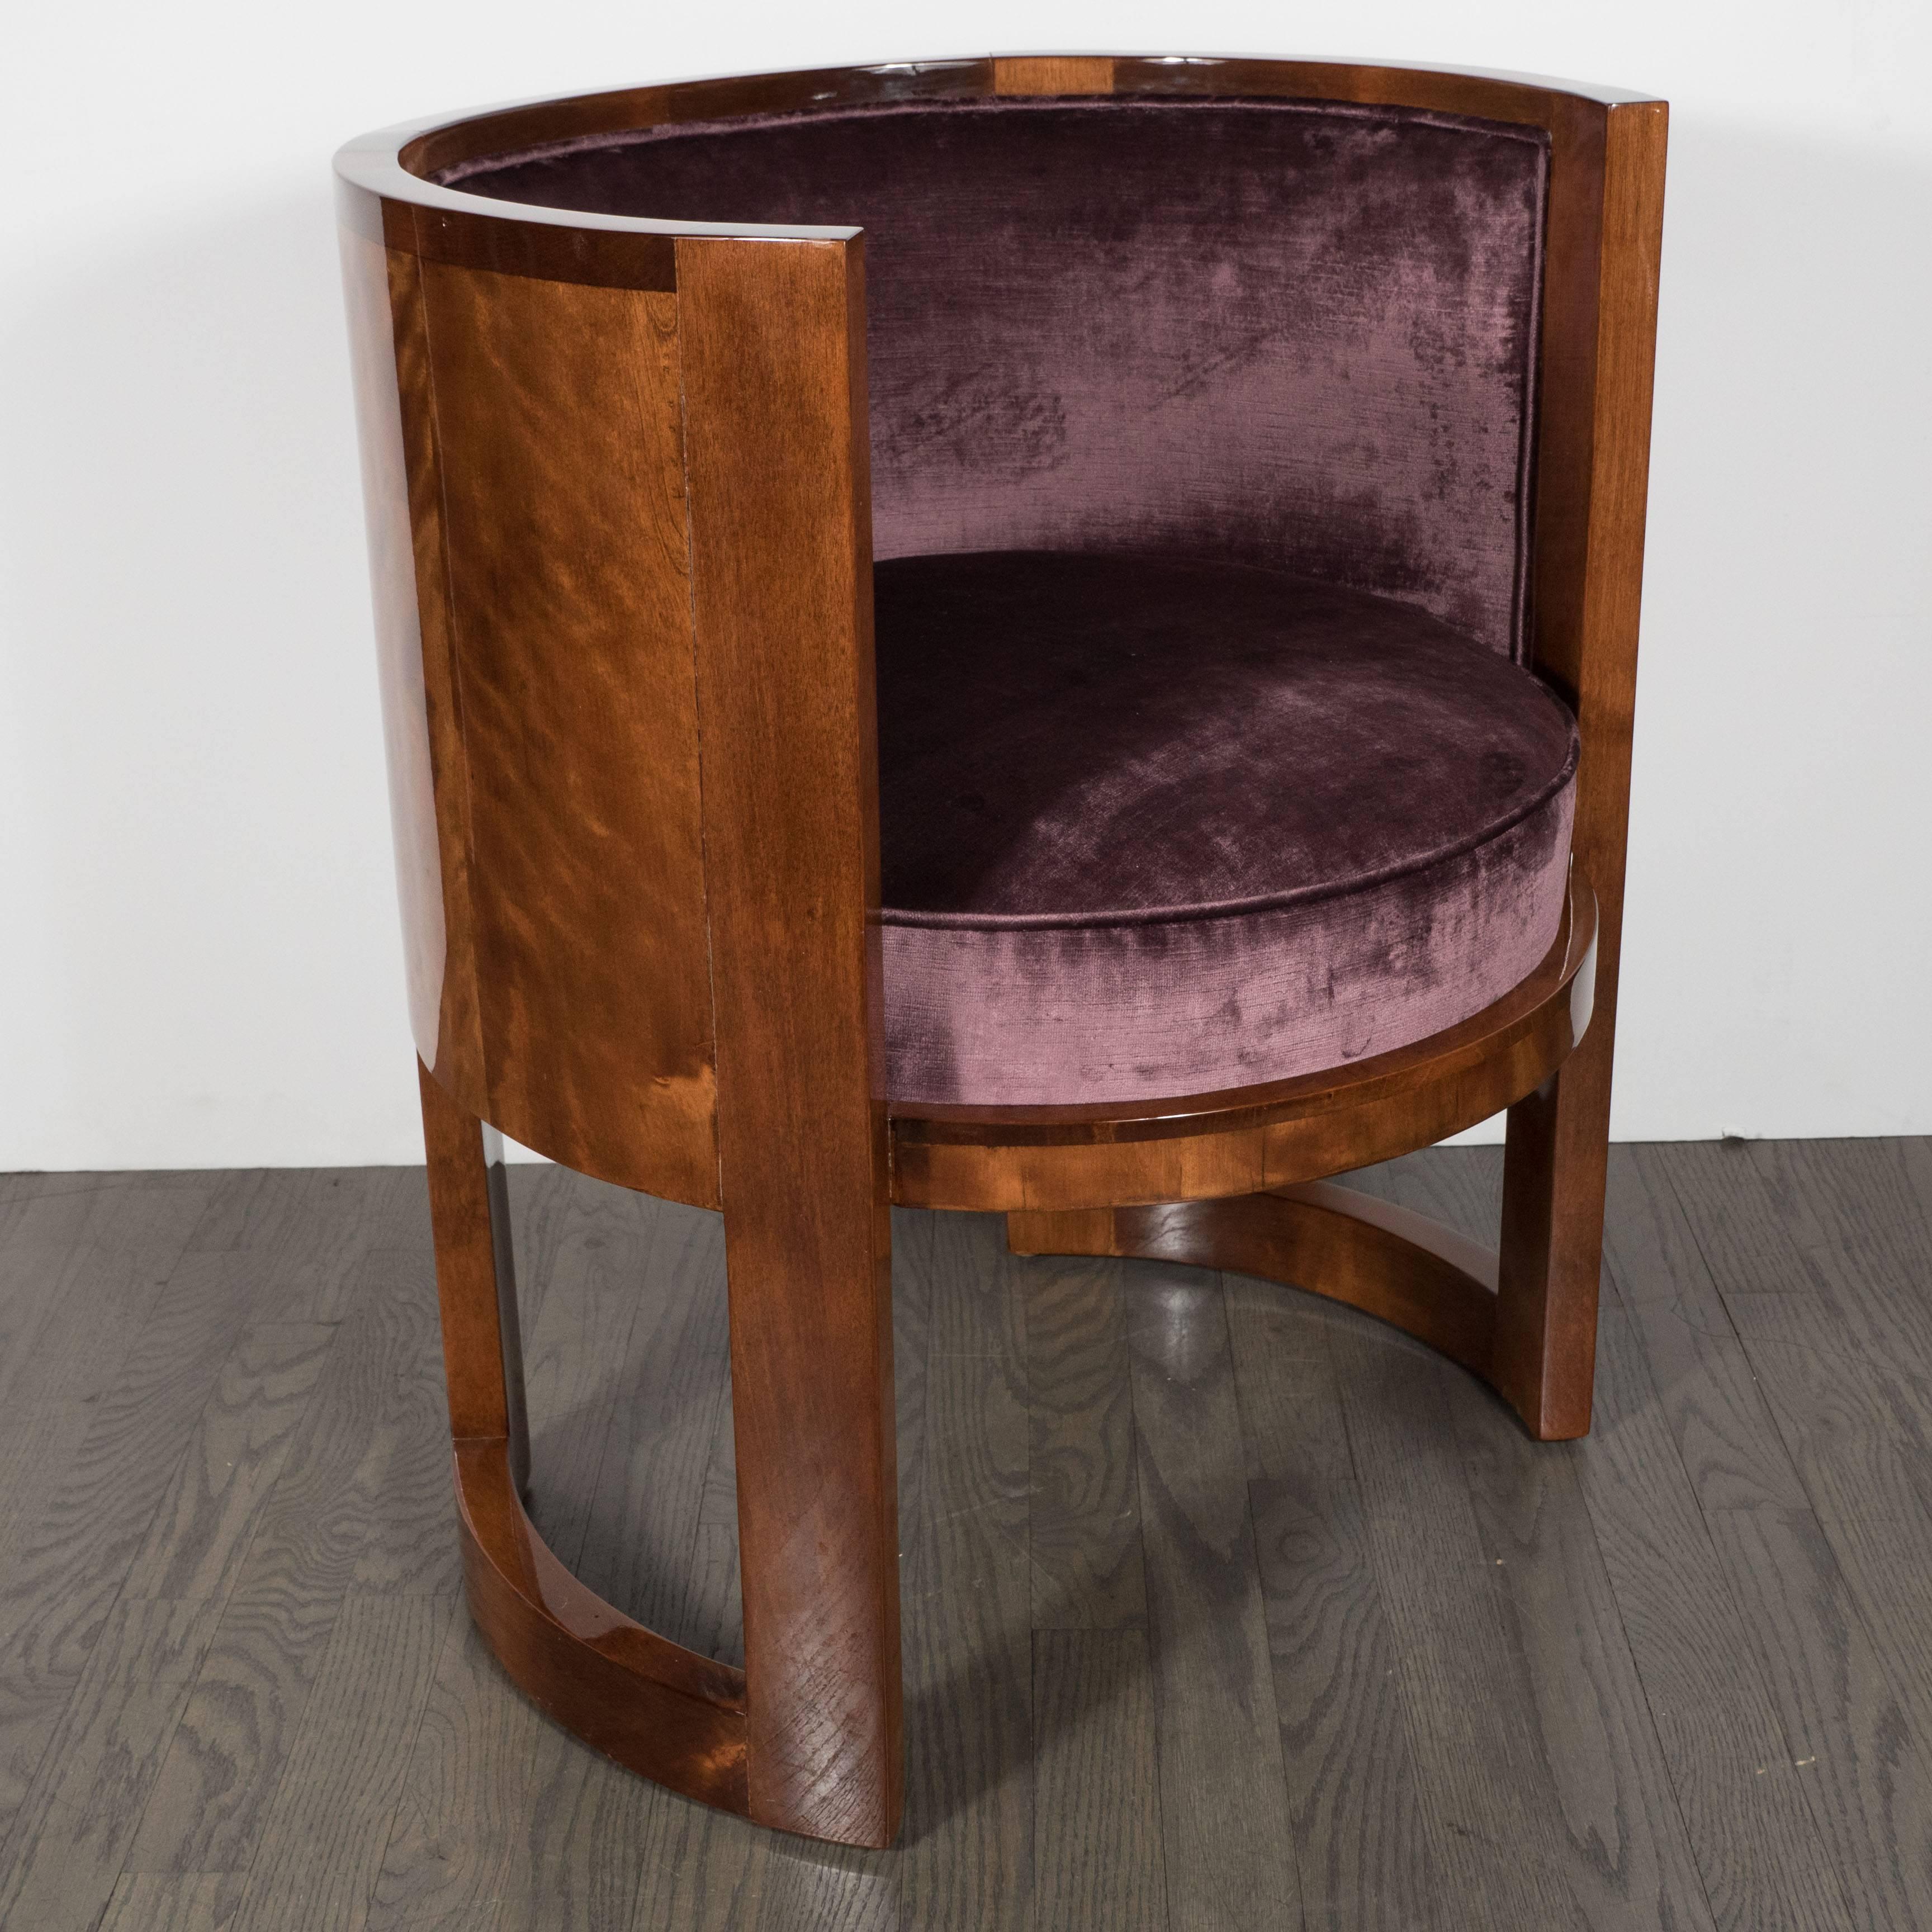 Fine Pair of Art Deco Curved-Back Salon Chairs in Smoked Amethyst Velvet 1